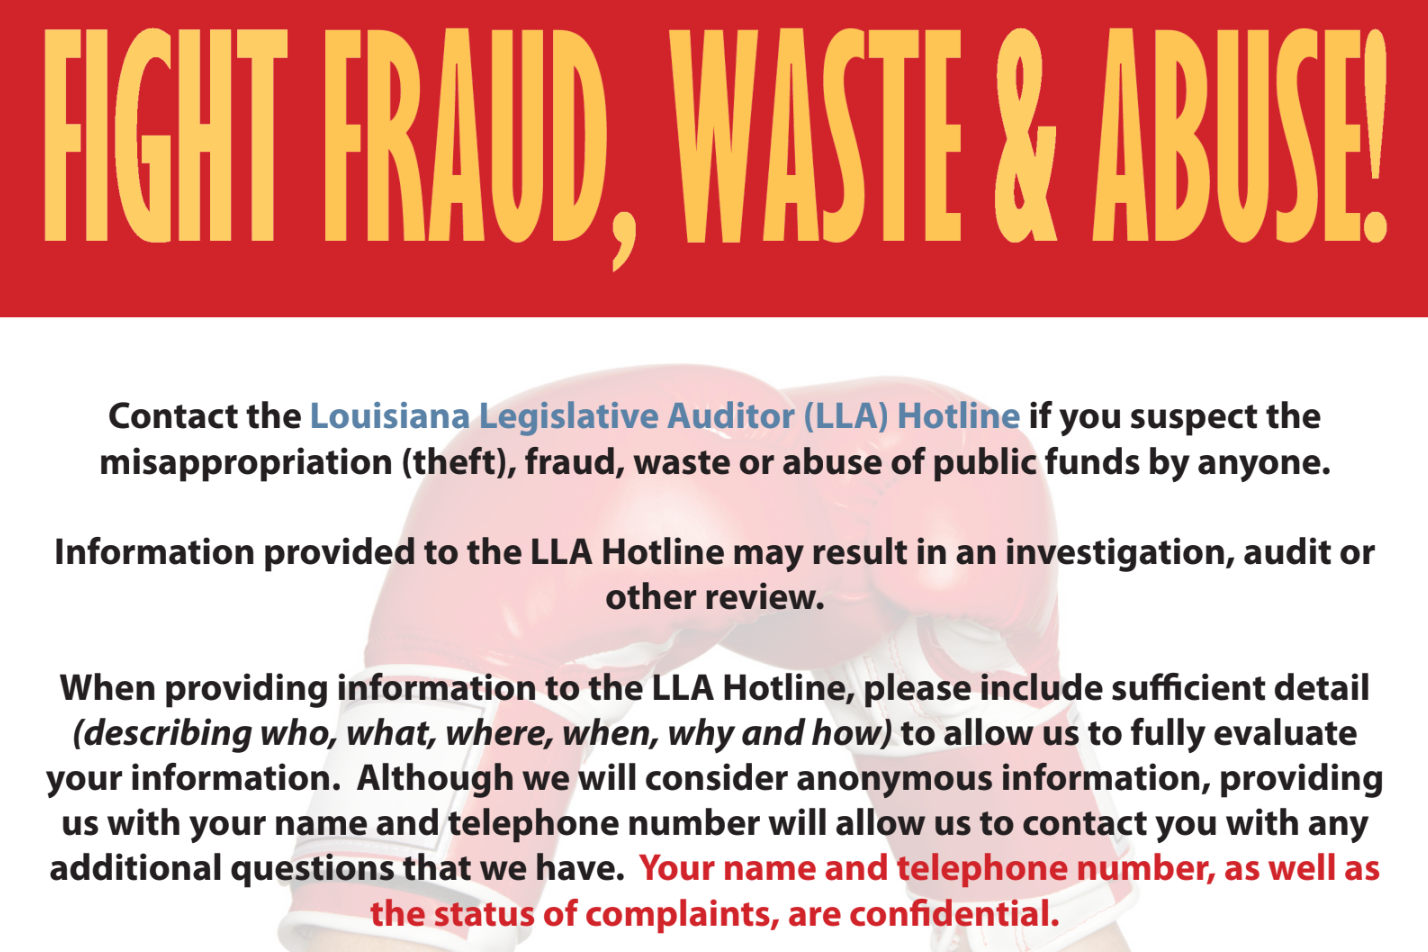 FIGHT PRAUD, WASTE & ABUSE Contact the Louisiana Legislative Auditor (LLA) Hotline if you suspect the misappropriation (theft), fraud, waste or abuse of public funds by anyone. Information provided to the LLA Hotline may result in an investigation, audit or other review. When providing information to the LLA Hotline, please include sufficient detail (describing who, what, where, when, why and how) to allow us to fully evaluate your information. Although we will consider anonymous information, providing us with your name and telephone number will allow us to contact you with any additional questions that we have. Your name and telephone number, as well as the status of complaints, are confidential.